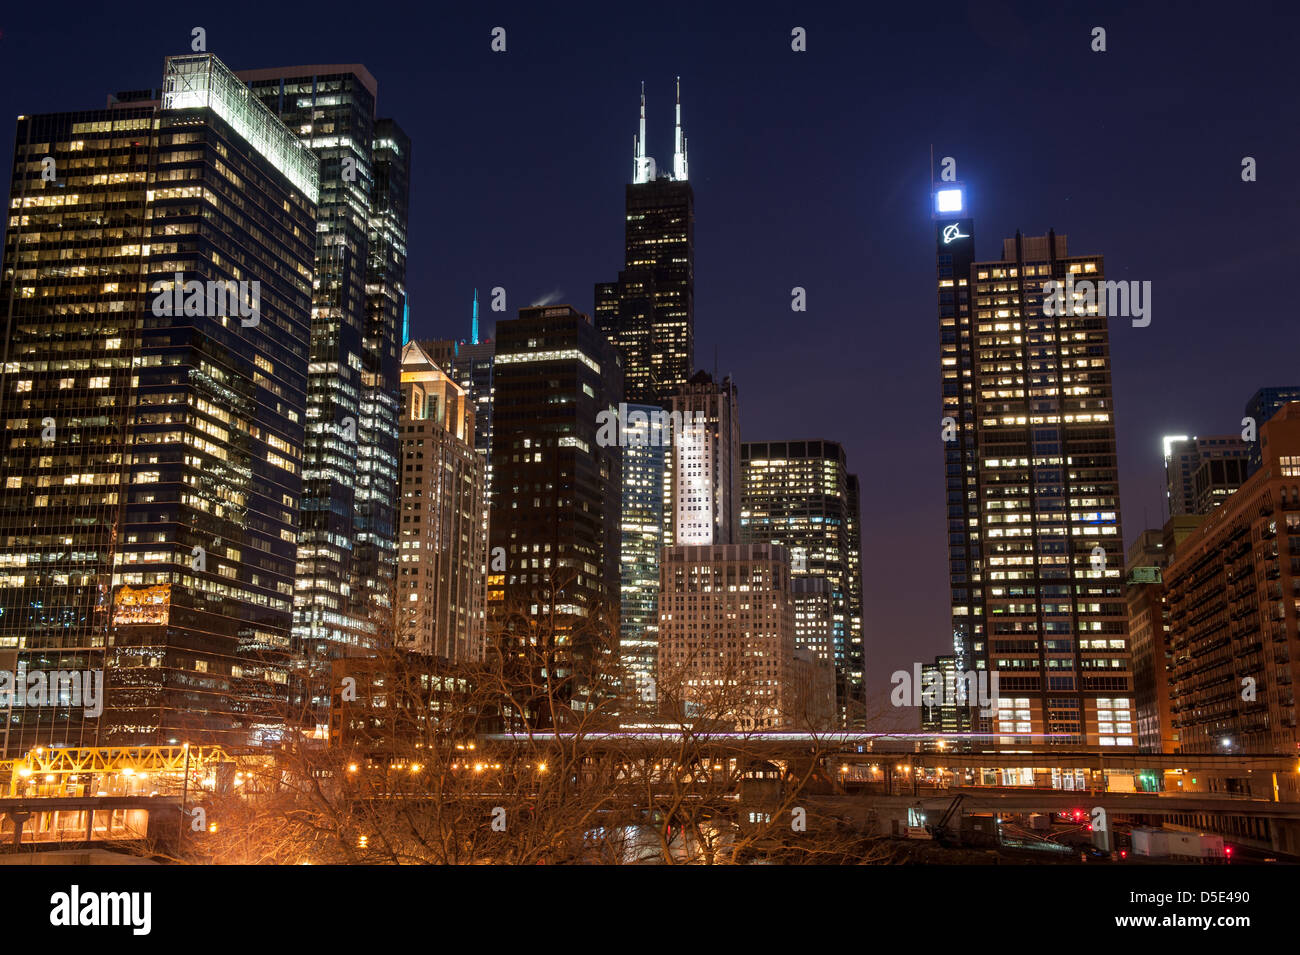 CHICAGO - MARCH 28: A view of the Chicago skyline at night including Willis Tower in Chicago, USA on March 28, 2013. Stock Photo